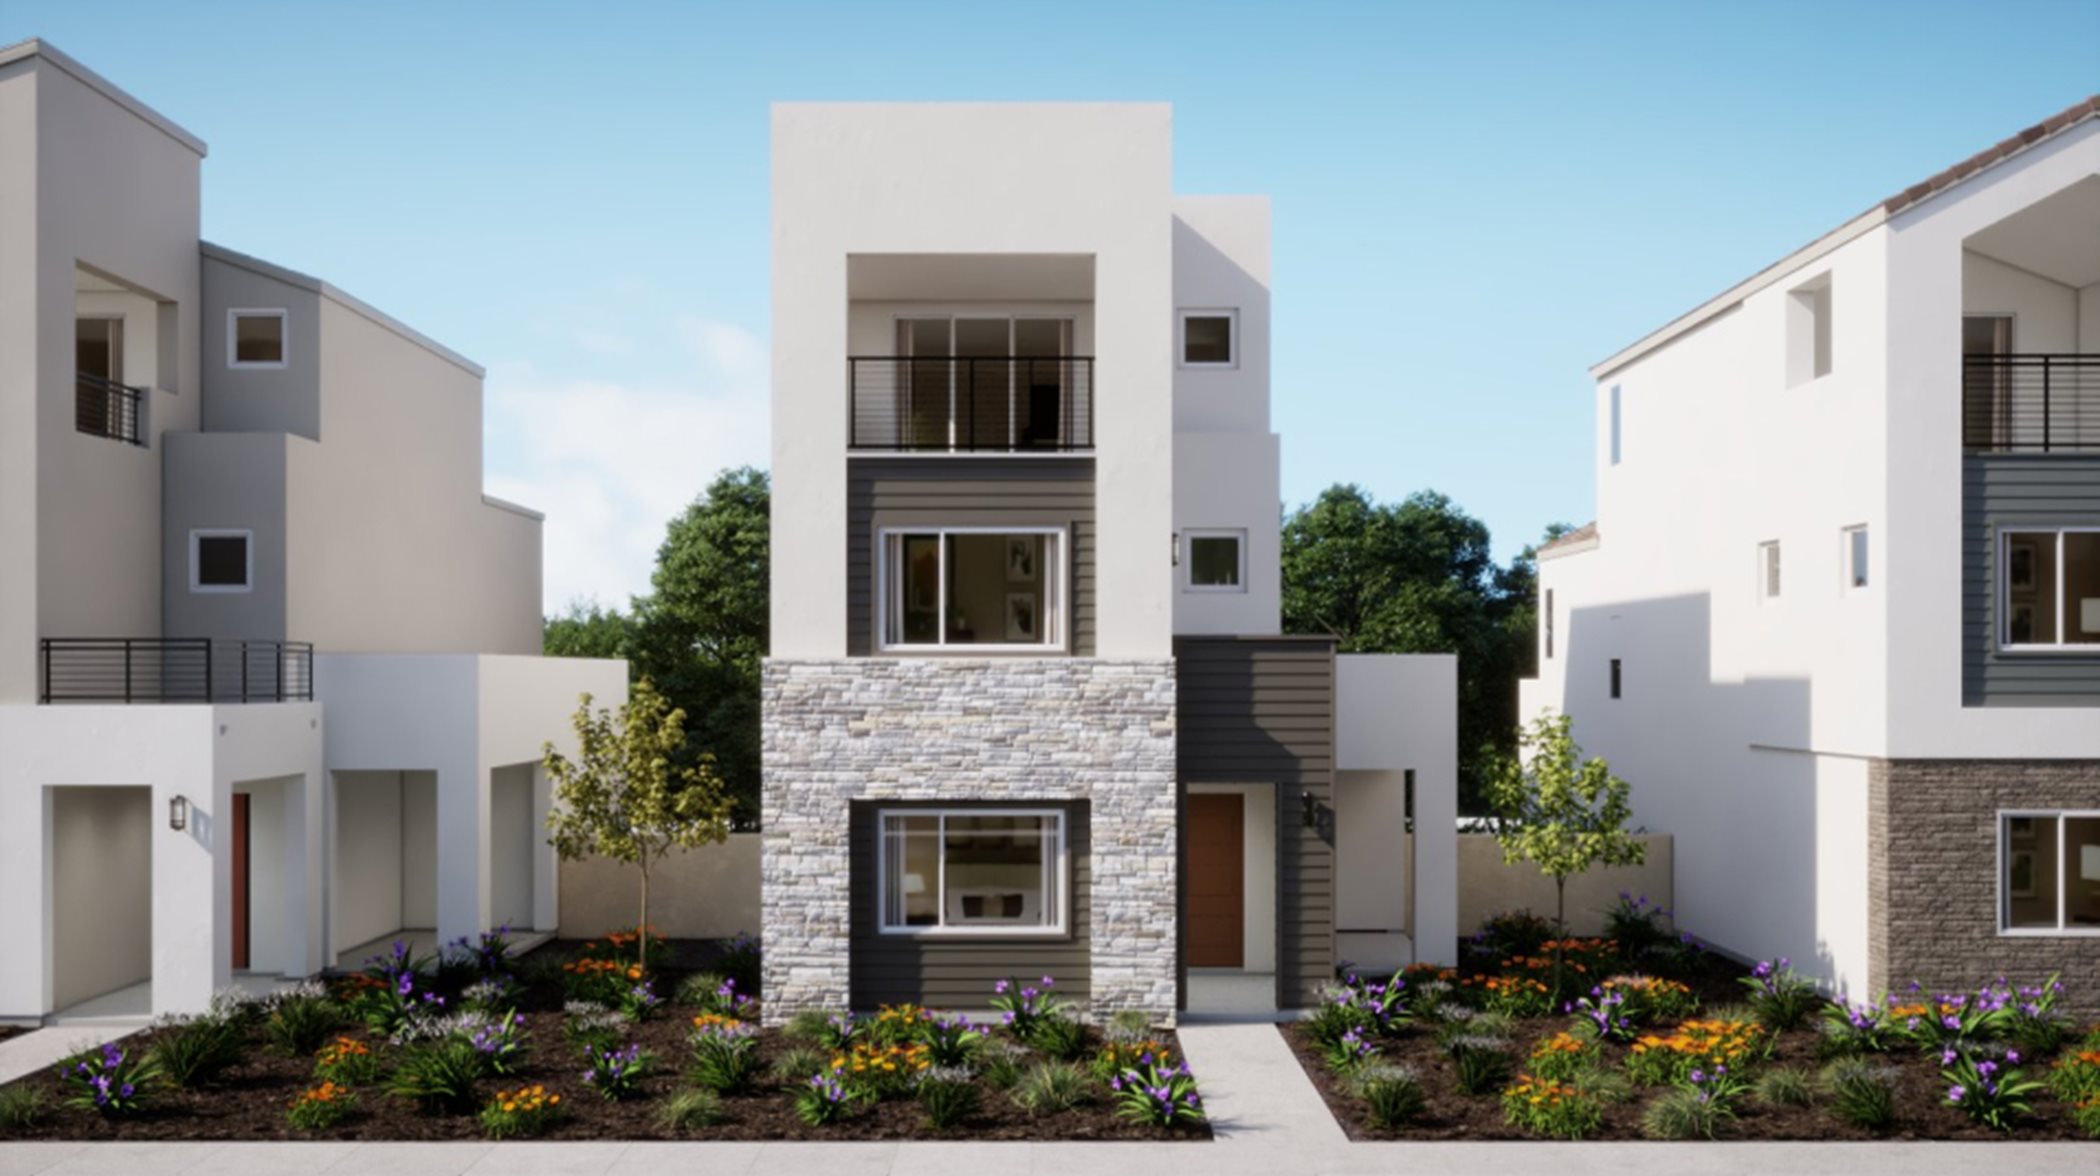 Transitional-style townhome exterior